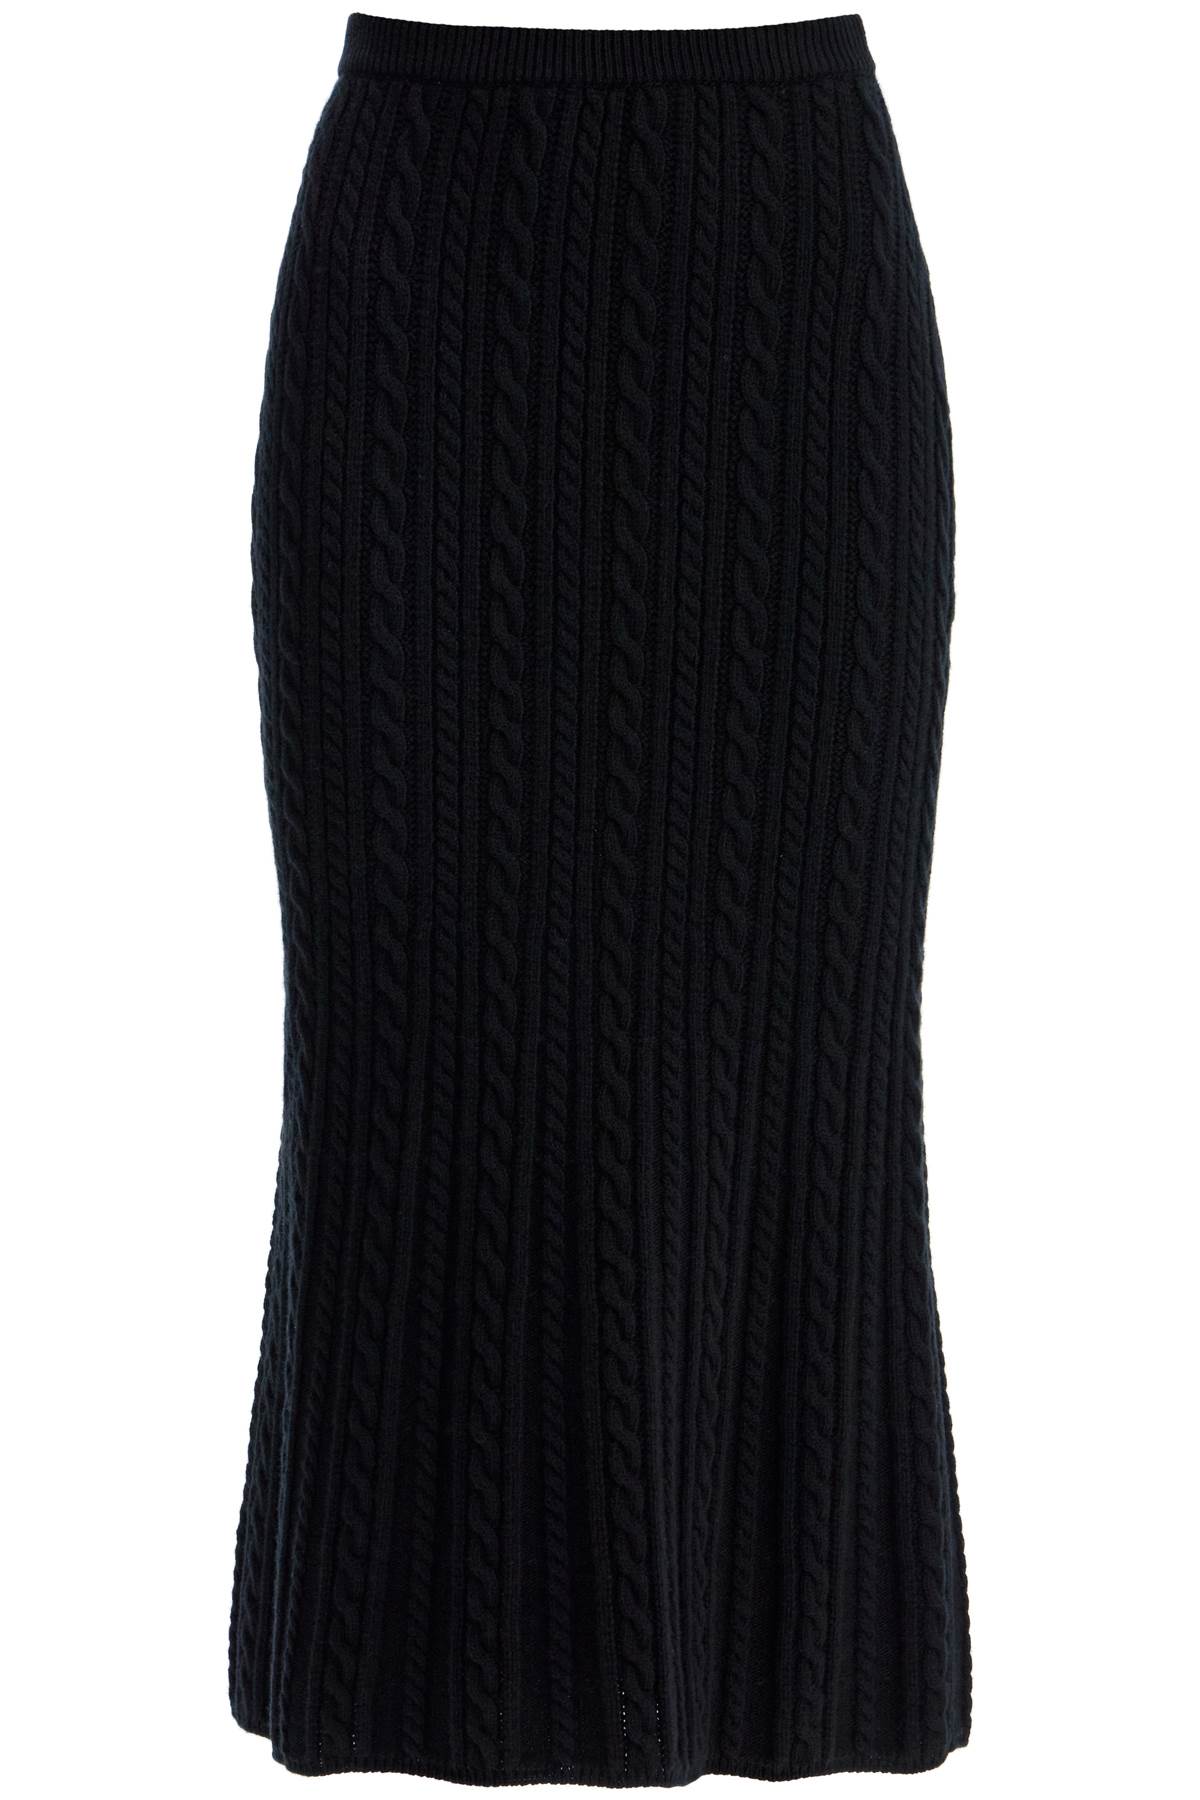 Alessandra Rich Cable-knit Wool Midi Skirt In Black